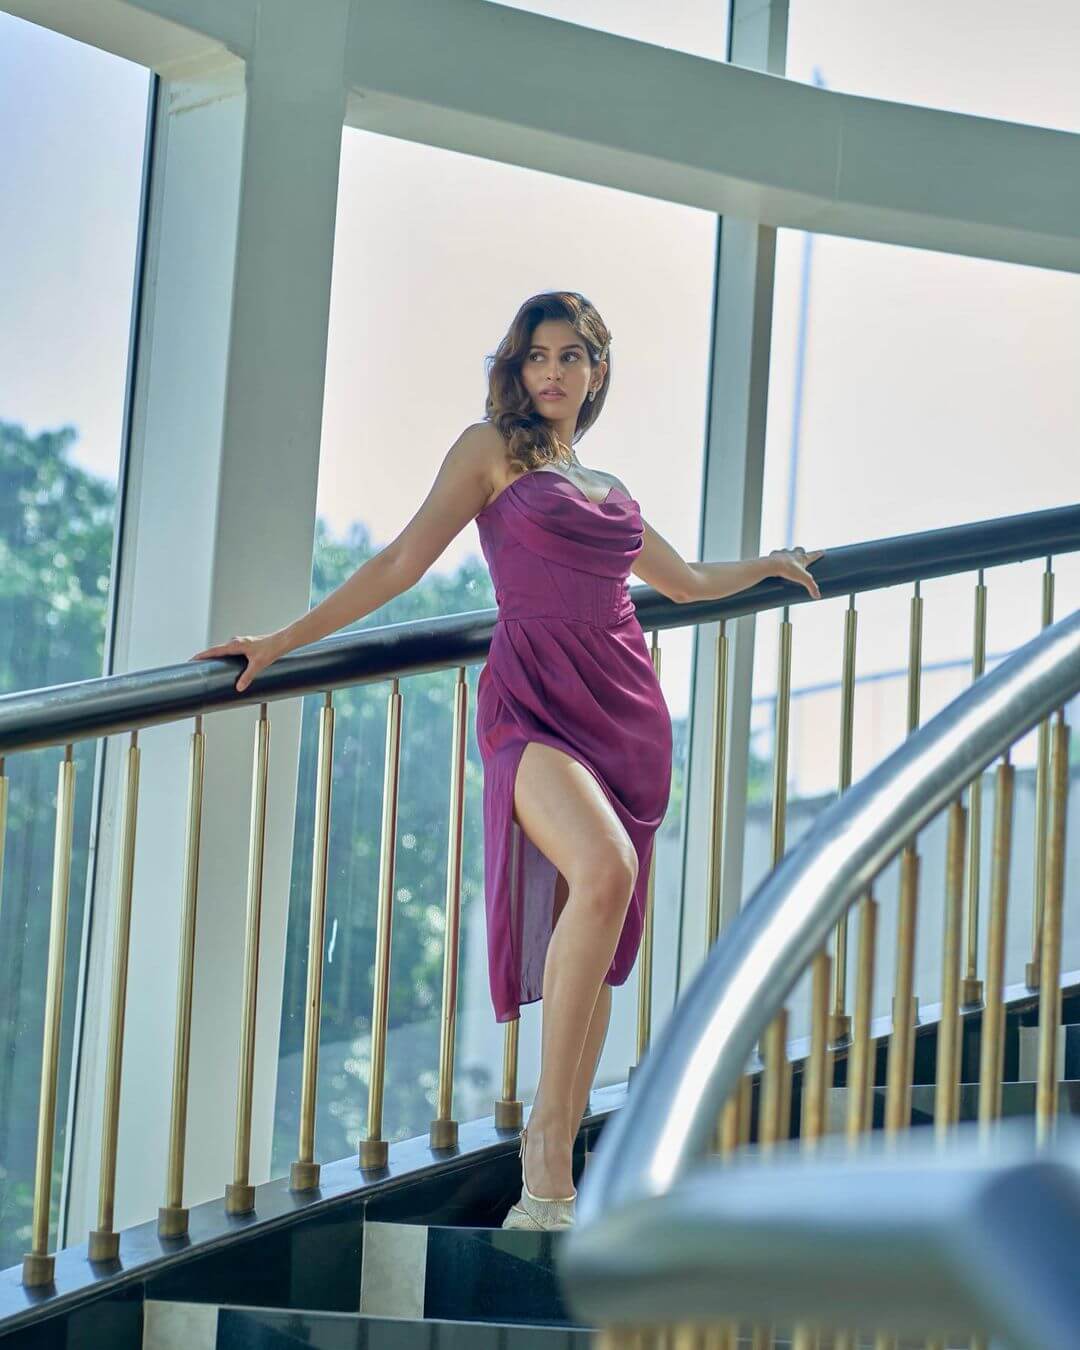 Sakshi Malikk Look Gorgeous In Purple High Slit Gown Sakshi Malik Hot and Sexy Outfit Look